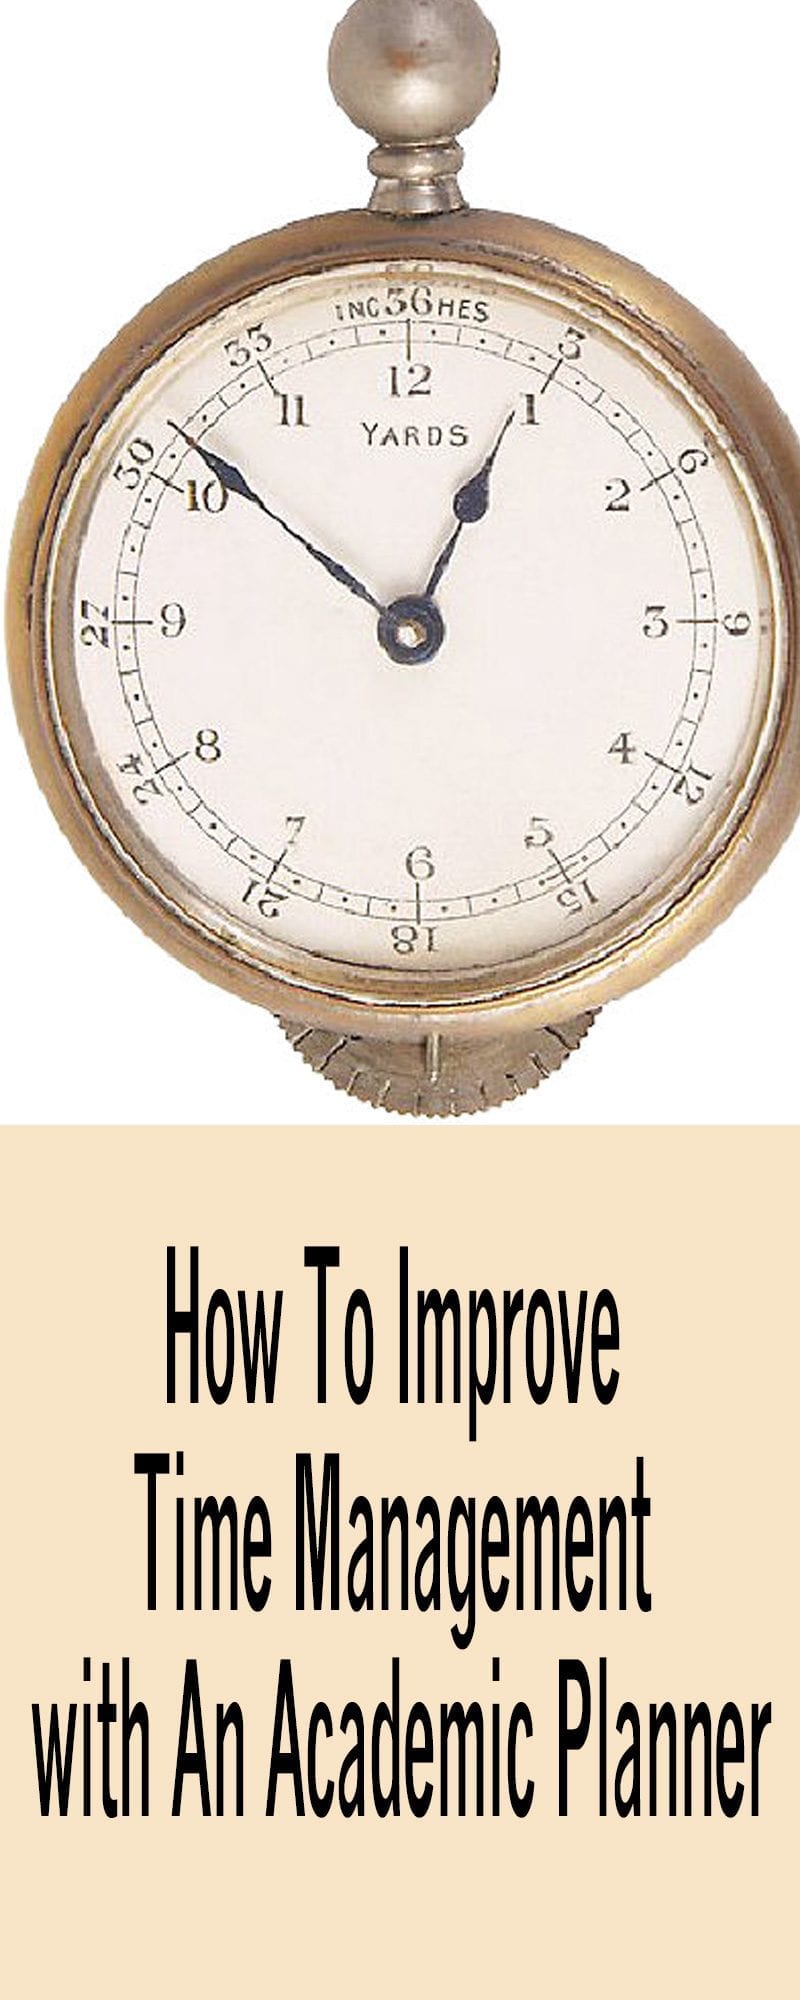 How To Improve Time Management with An Academic Planner